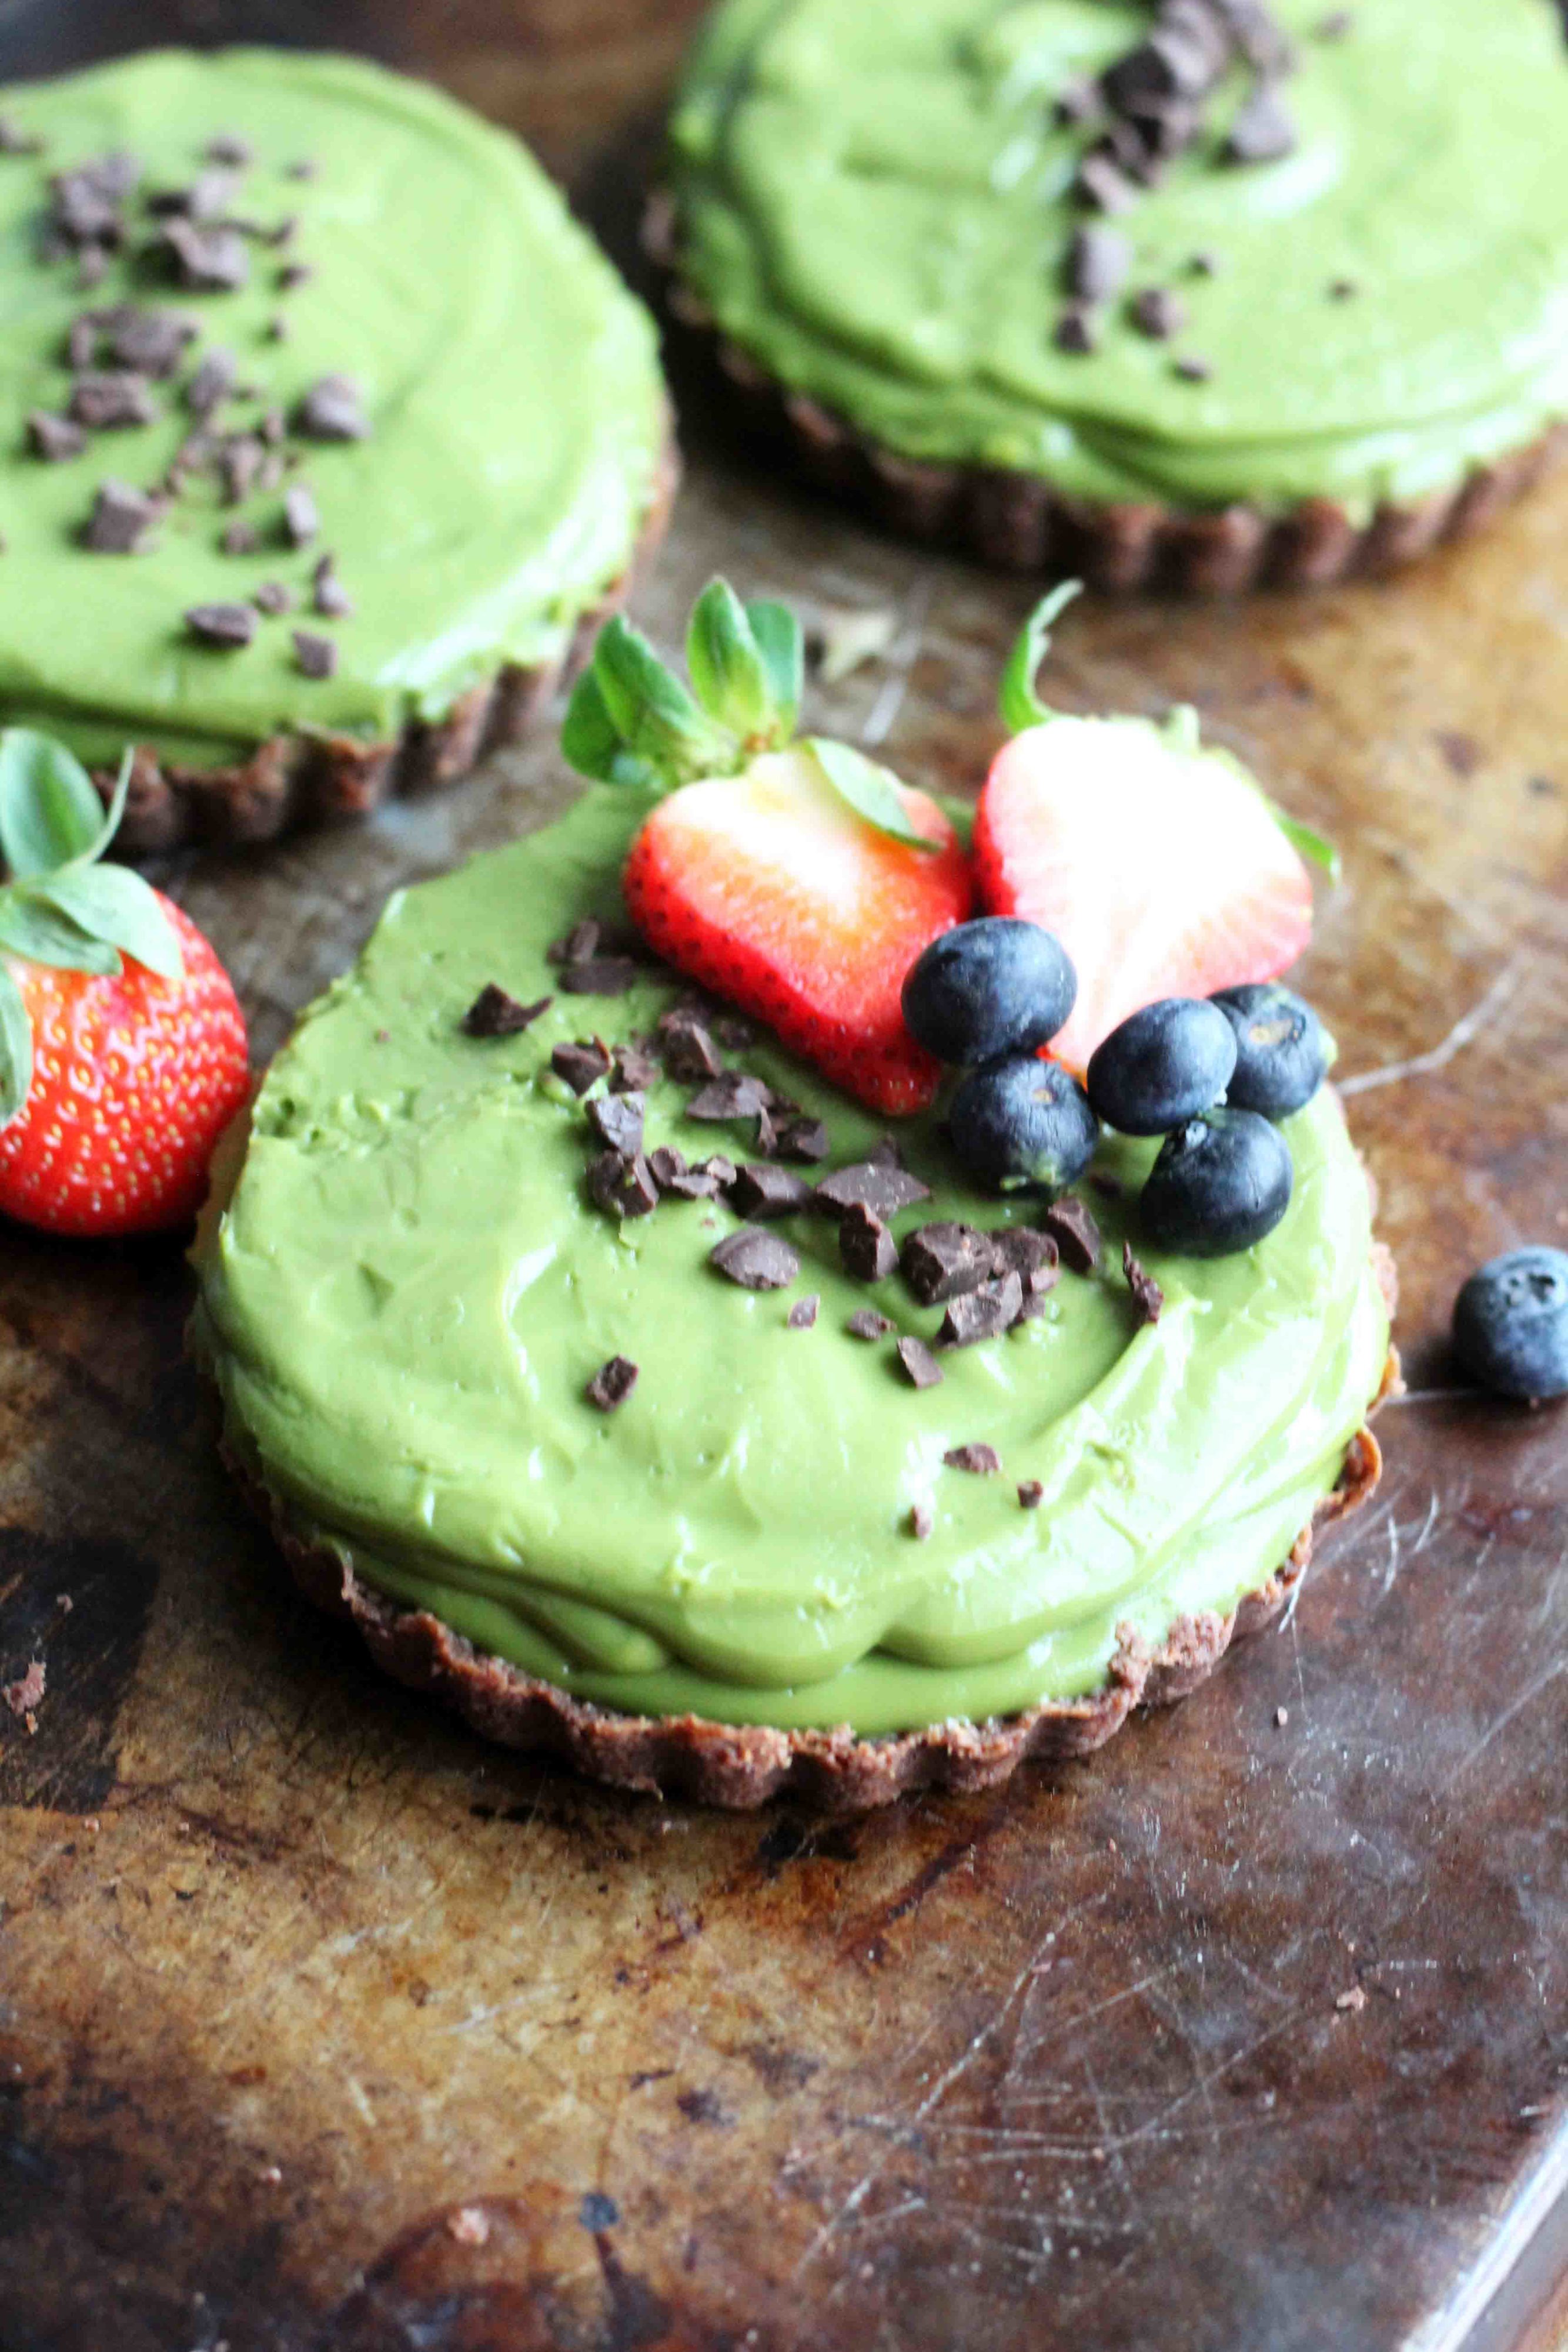 This Matcha Tart is secretly healthy! It's vegan, sweetened with coconut sugar and maple syrup and has a whole wheat chocolate crust.